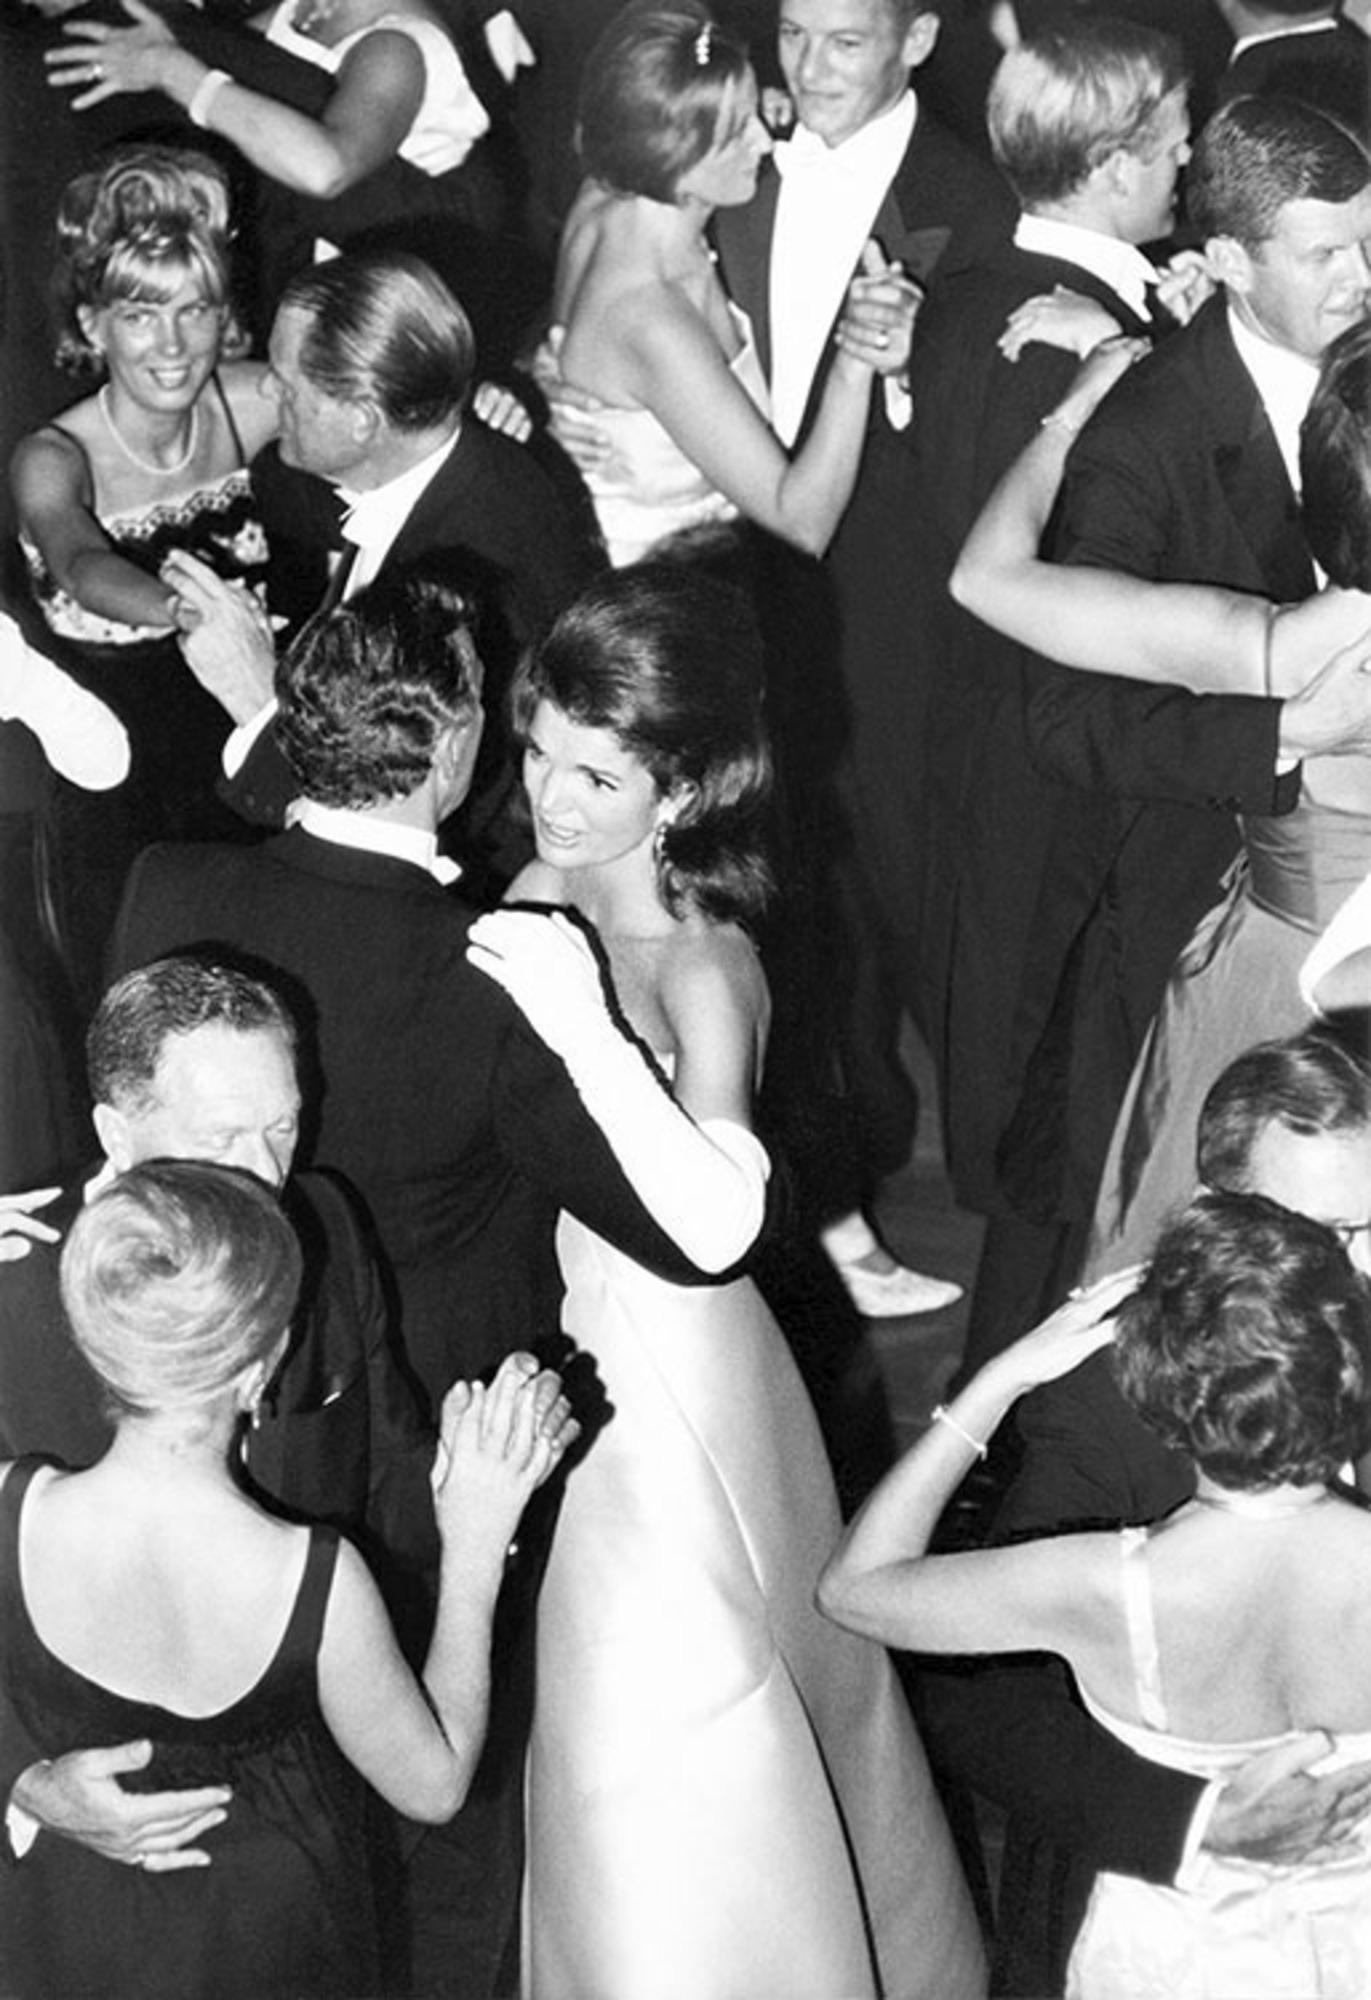 Lawrence Fried - Jackie Kennedy, Photography 1965, Printed After